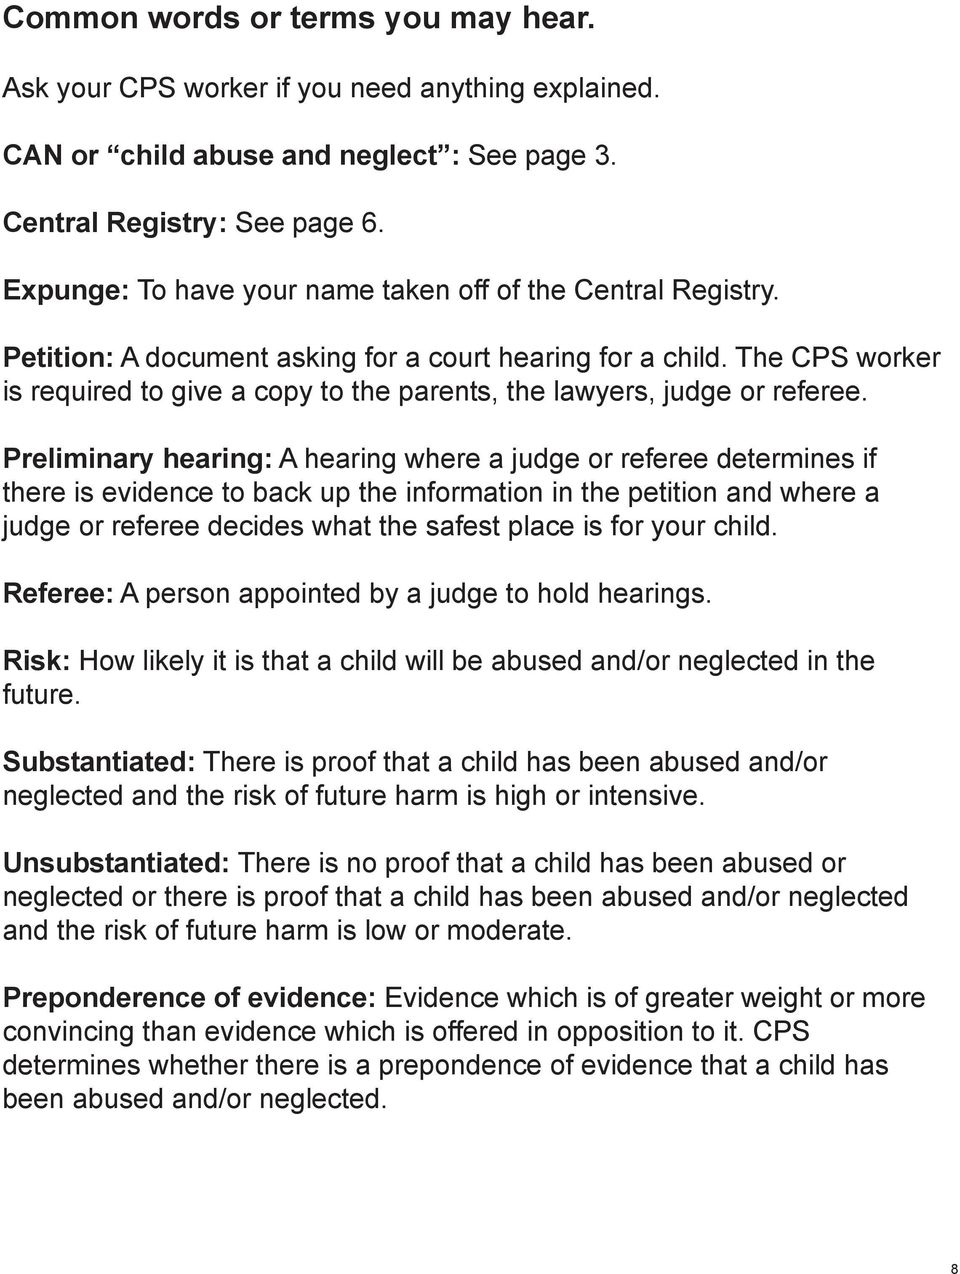 The CPS worker is required to give a copy to the parents, the lawyers, judge or referee.